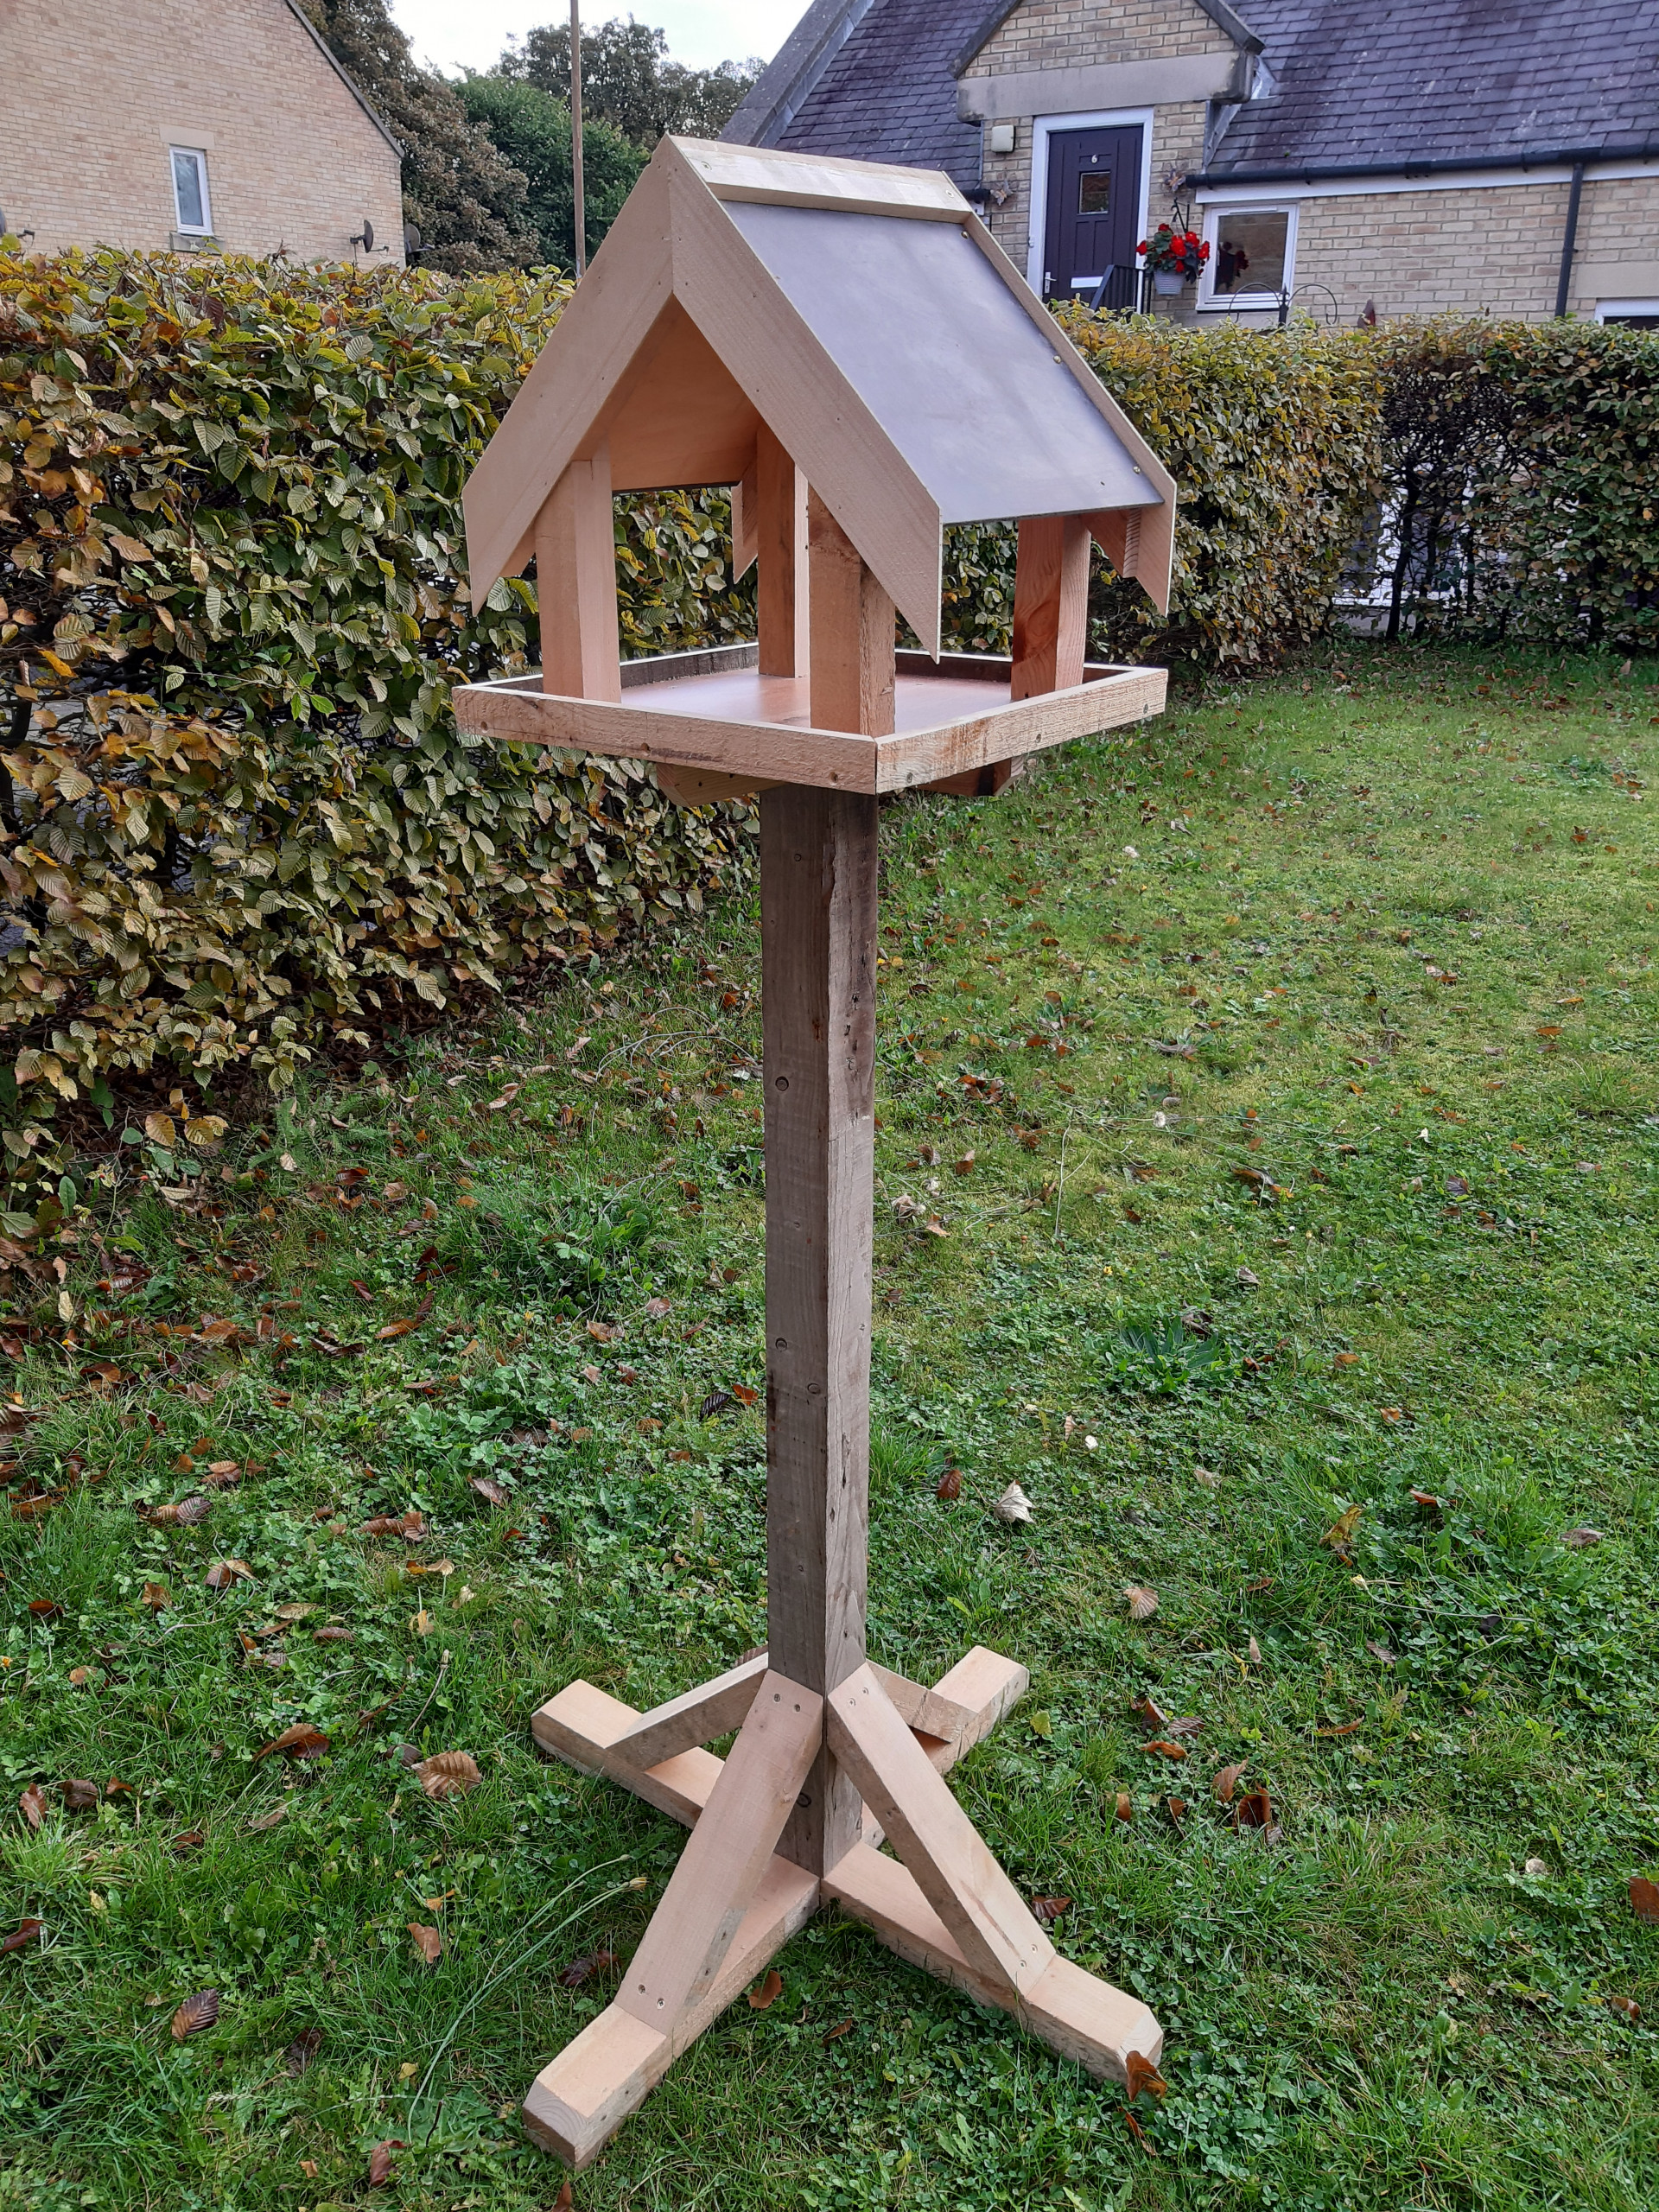 A birdhouse made from pallet wood